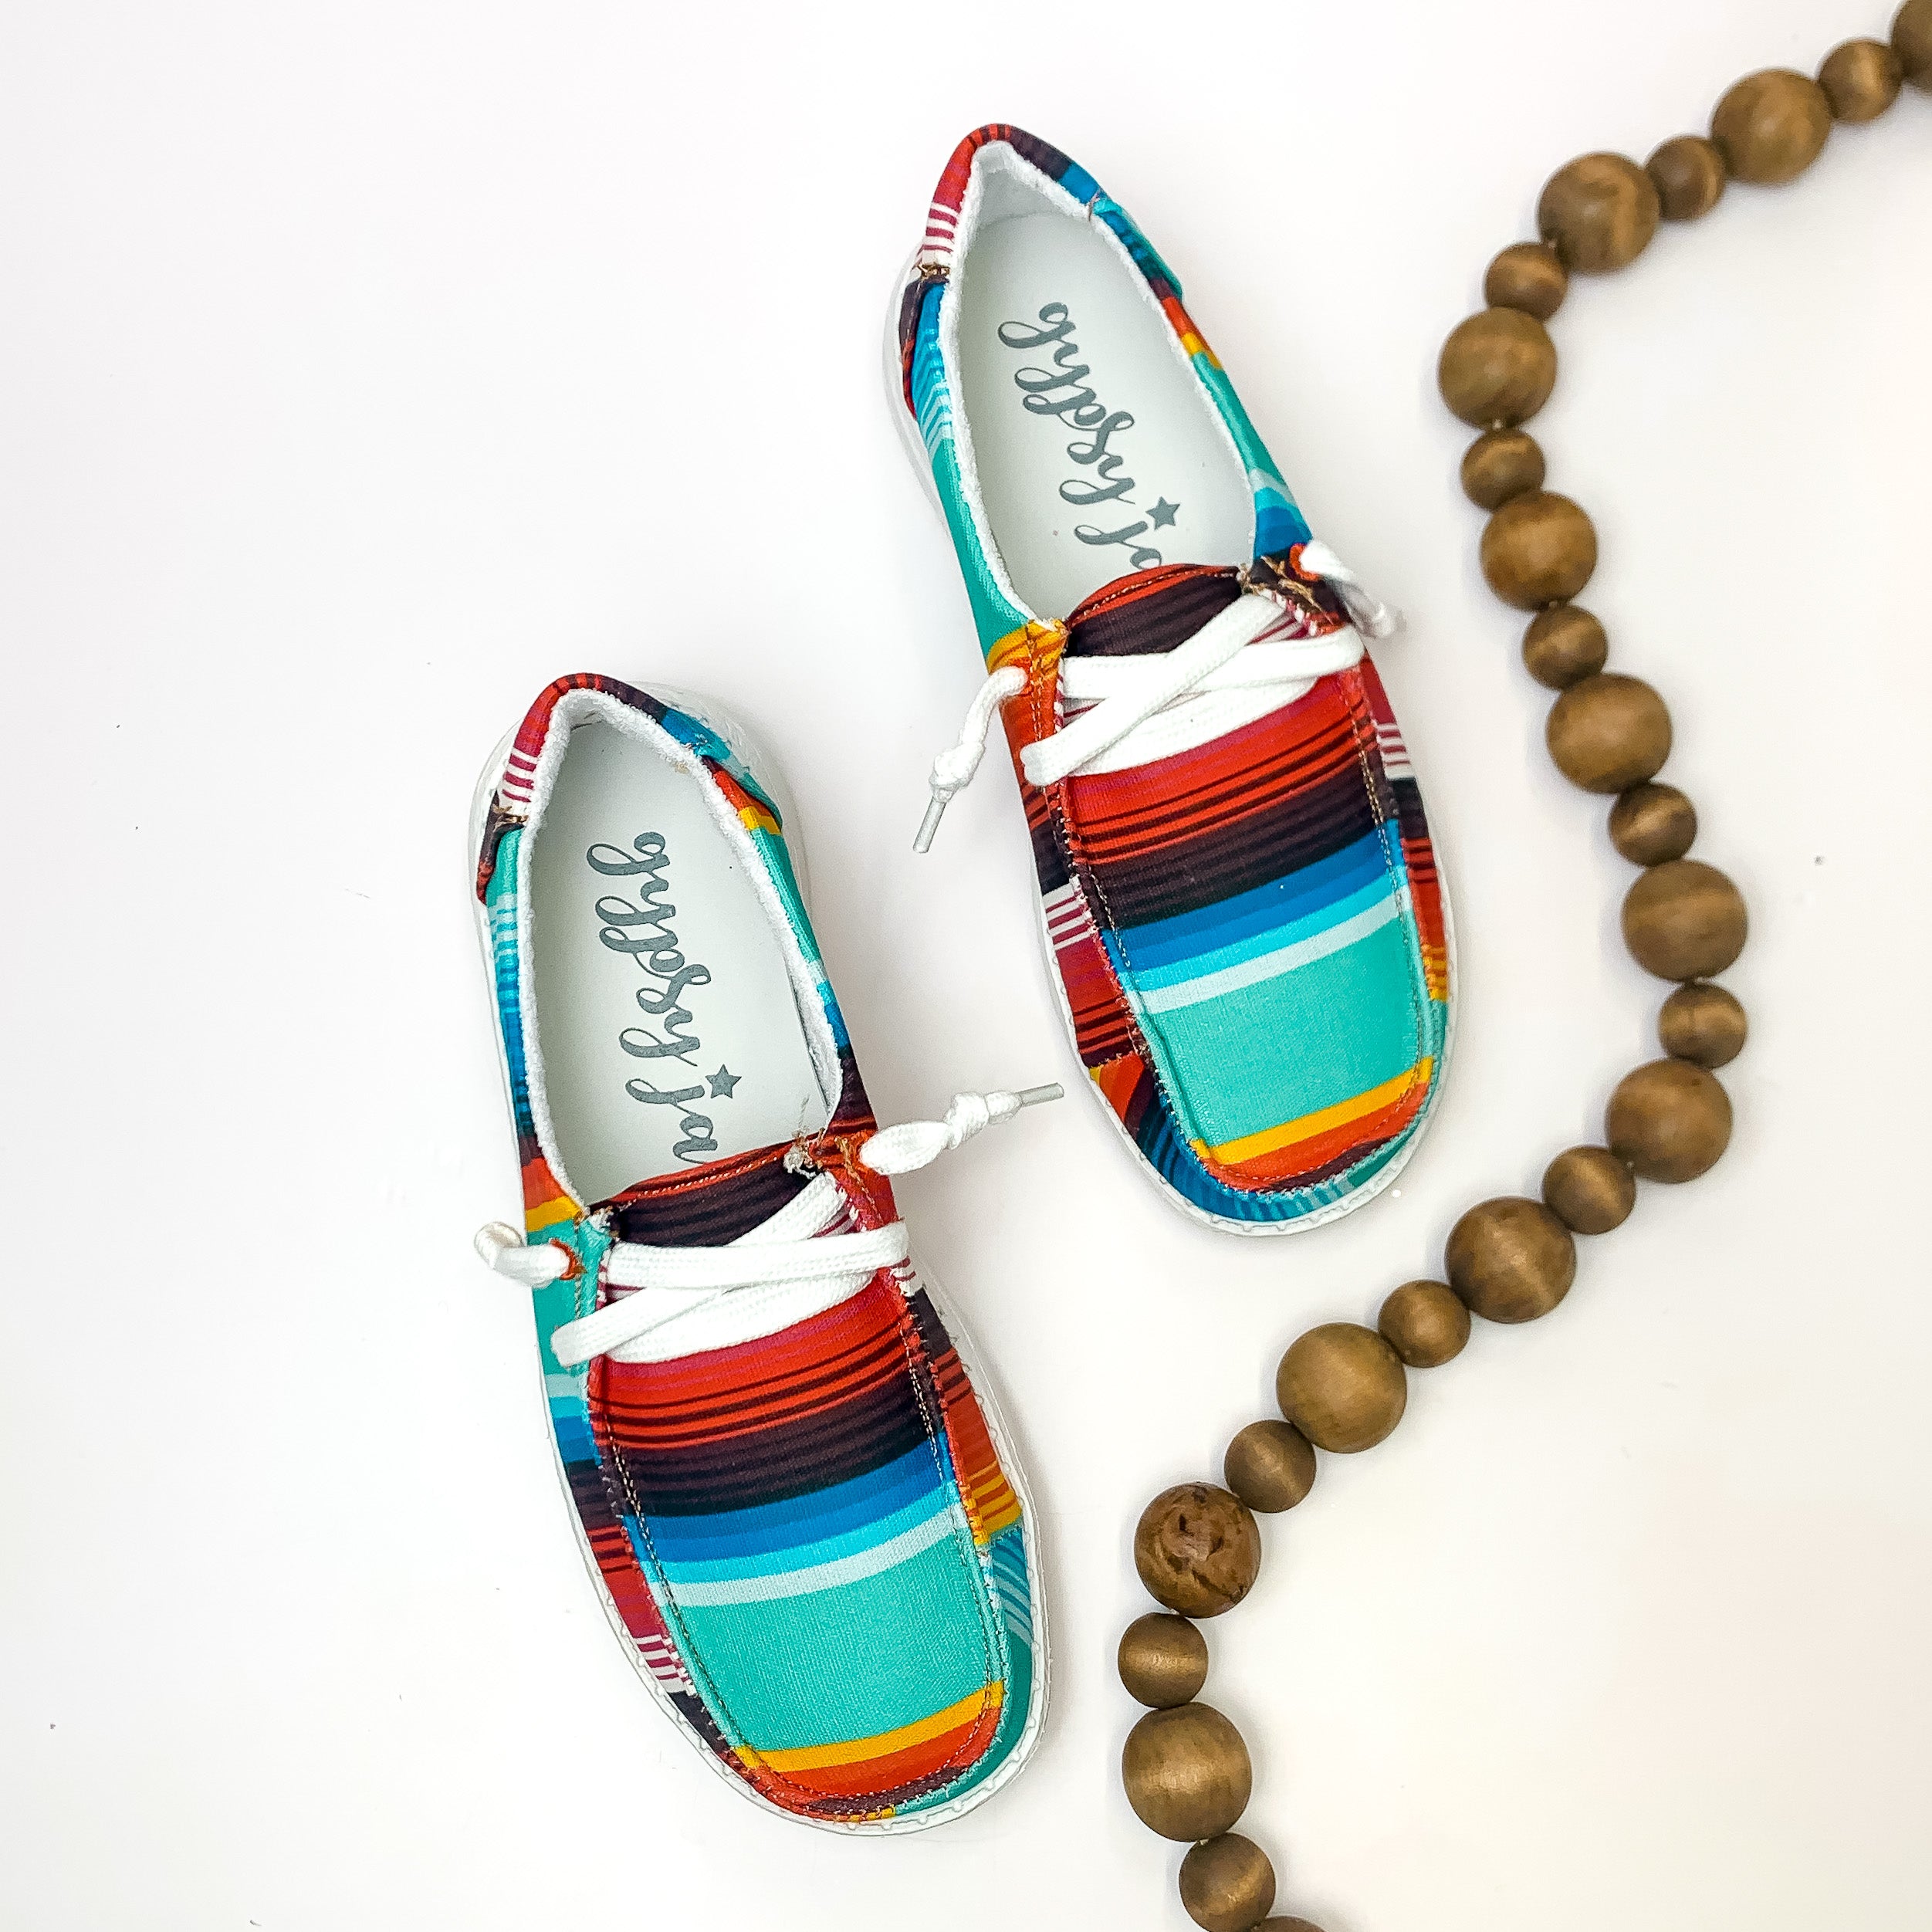 Very G | Have To Run Slip On Loafer with Laces in Serape Print - Giddy Up Glamour Boutique